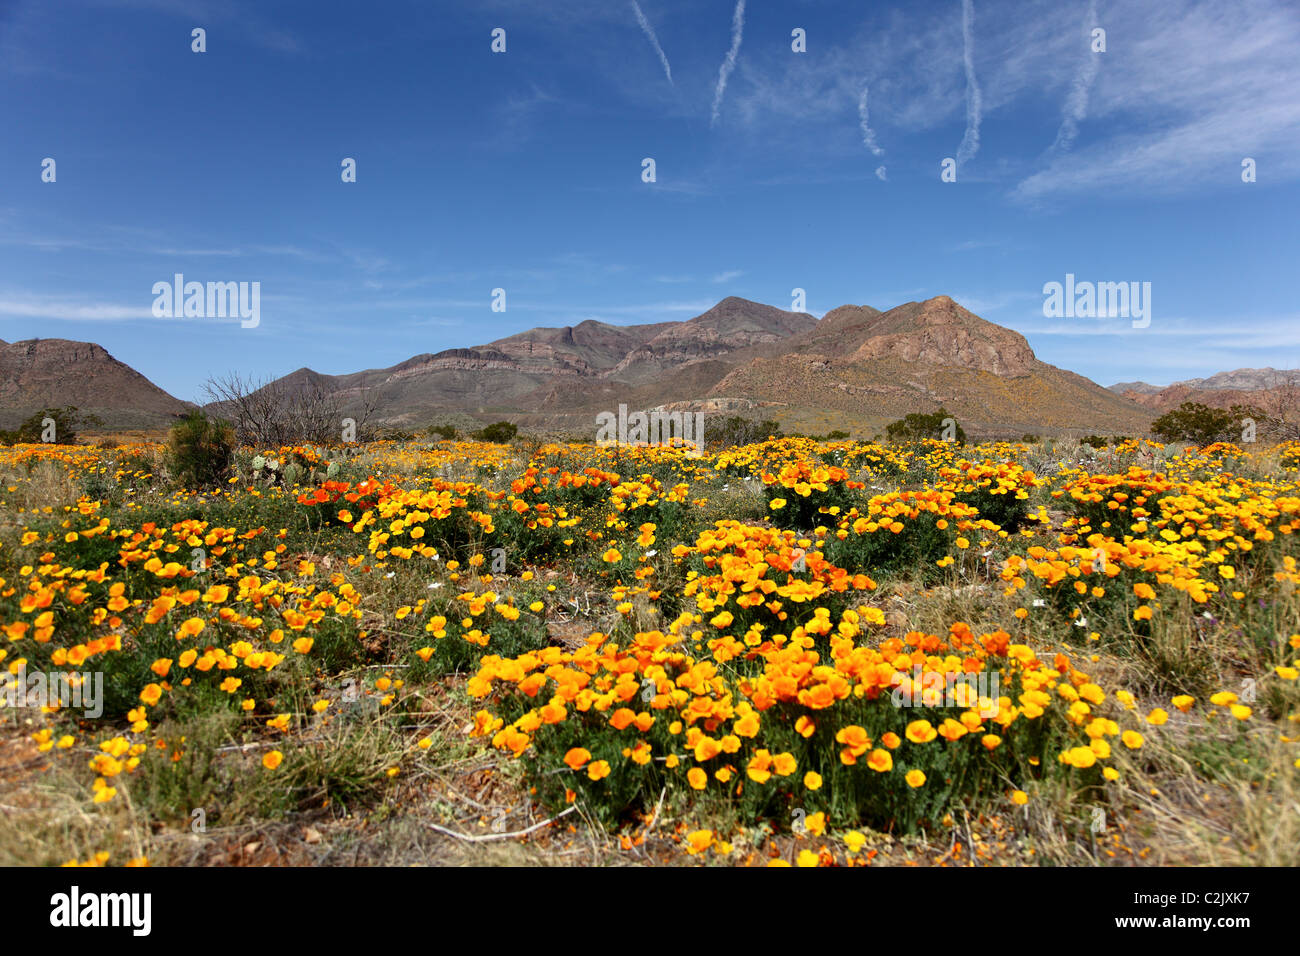 Yellow poppies in a desert field in front of the Franklin Mountains in